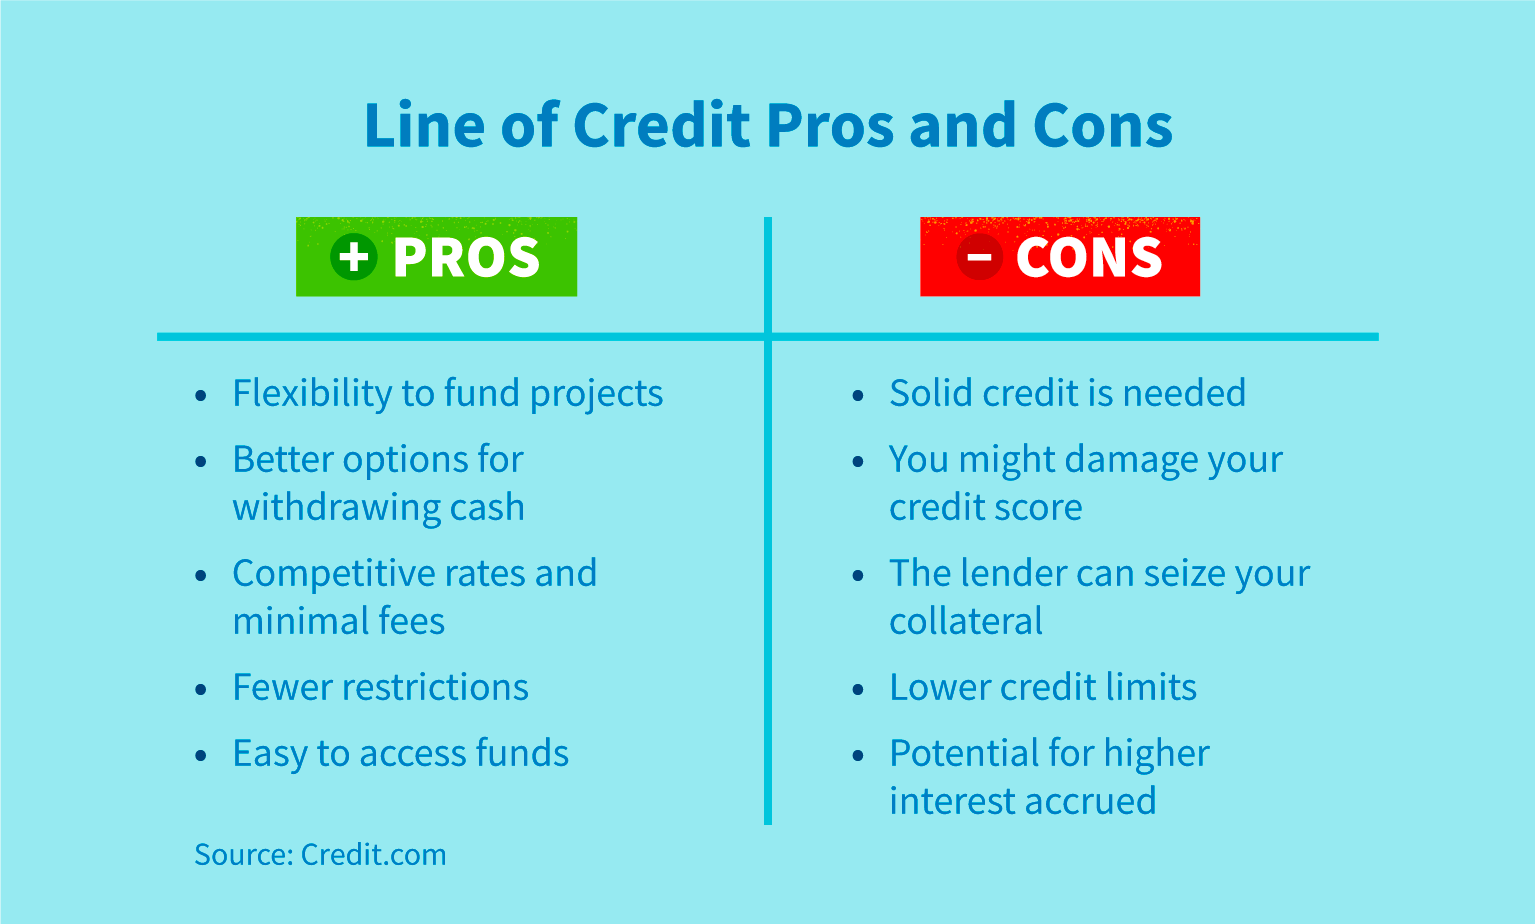 What Is a Line of Credit and How Does It Work?